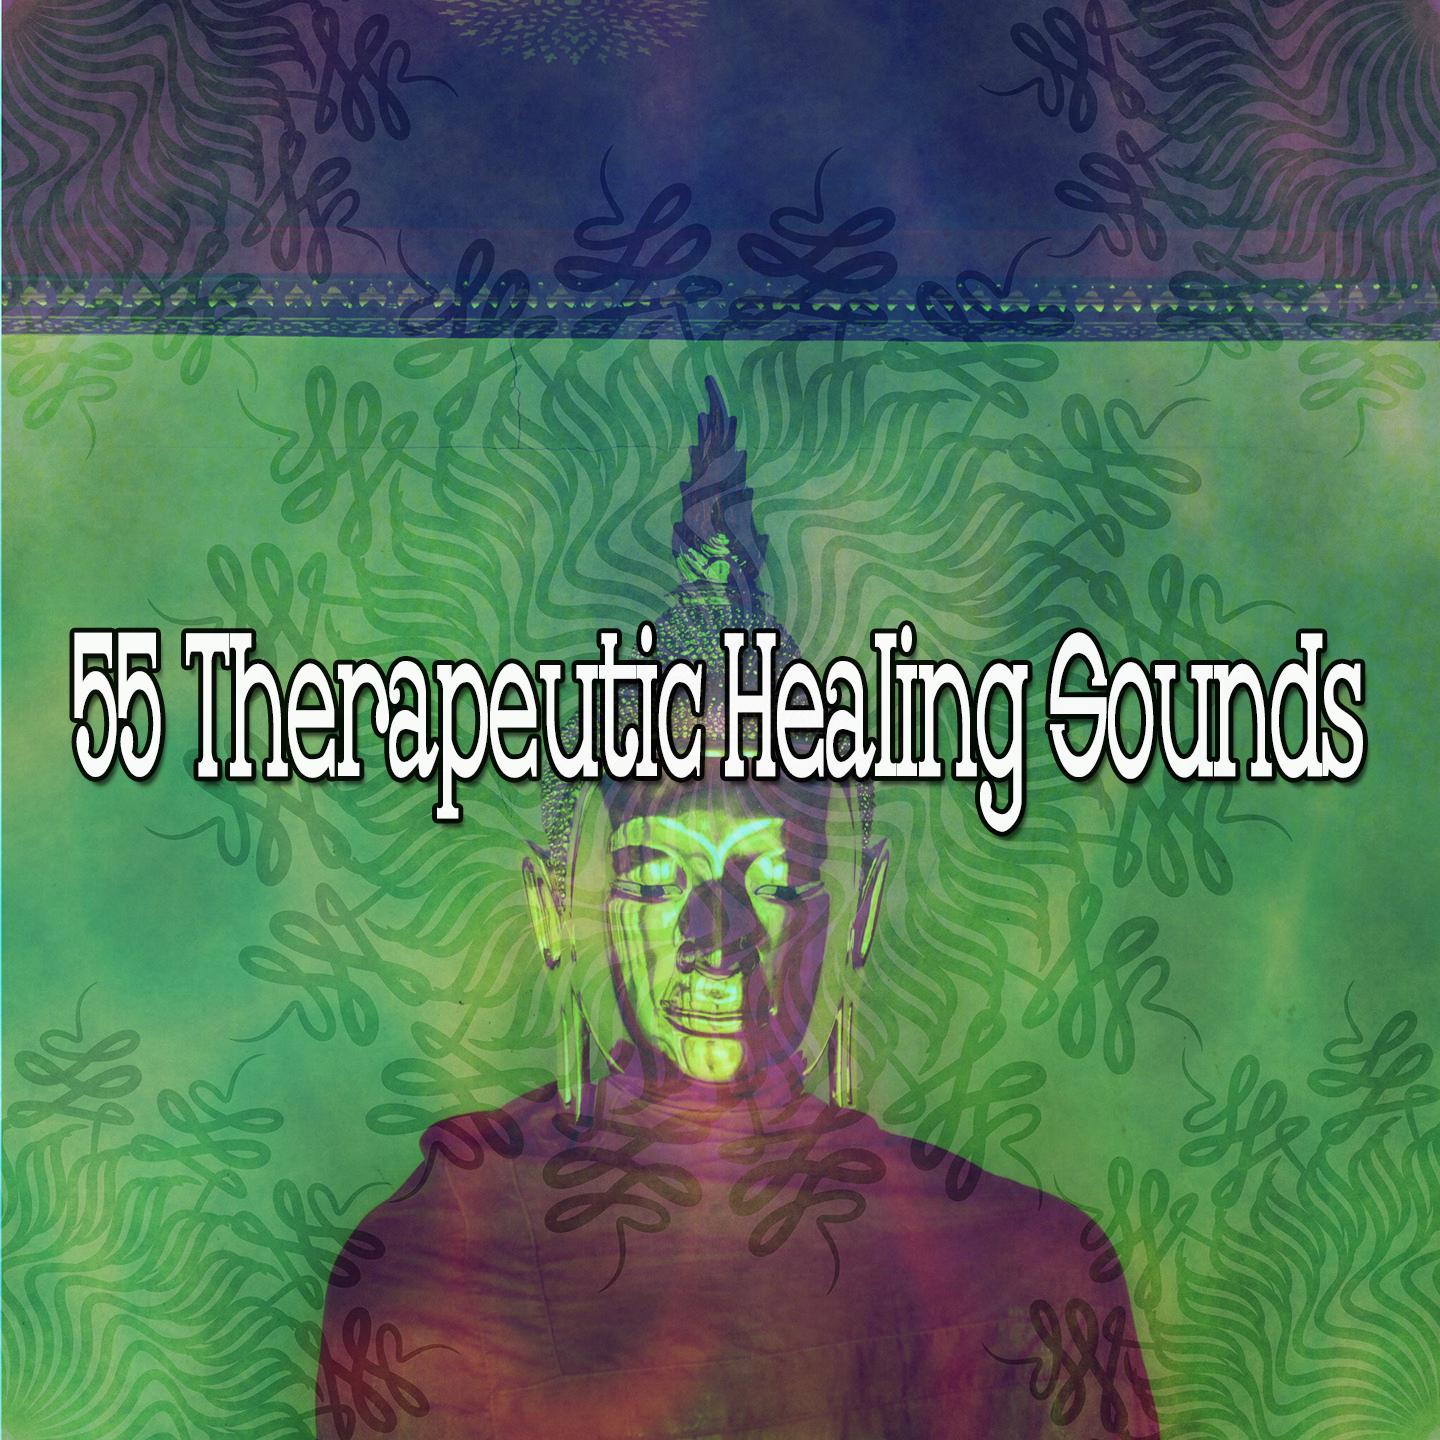 55 Therapeutic Healing Sounds